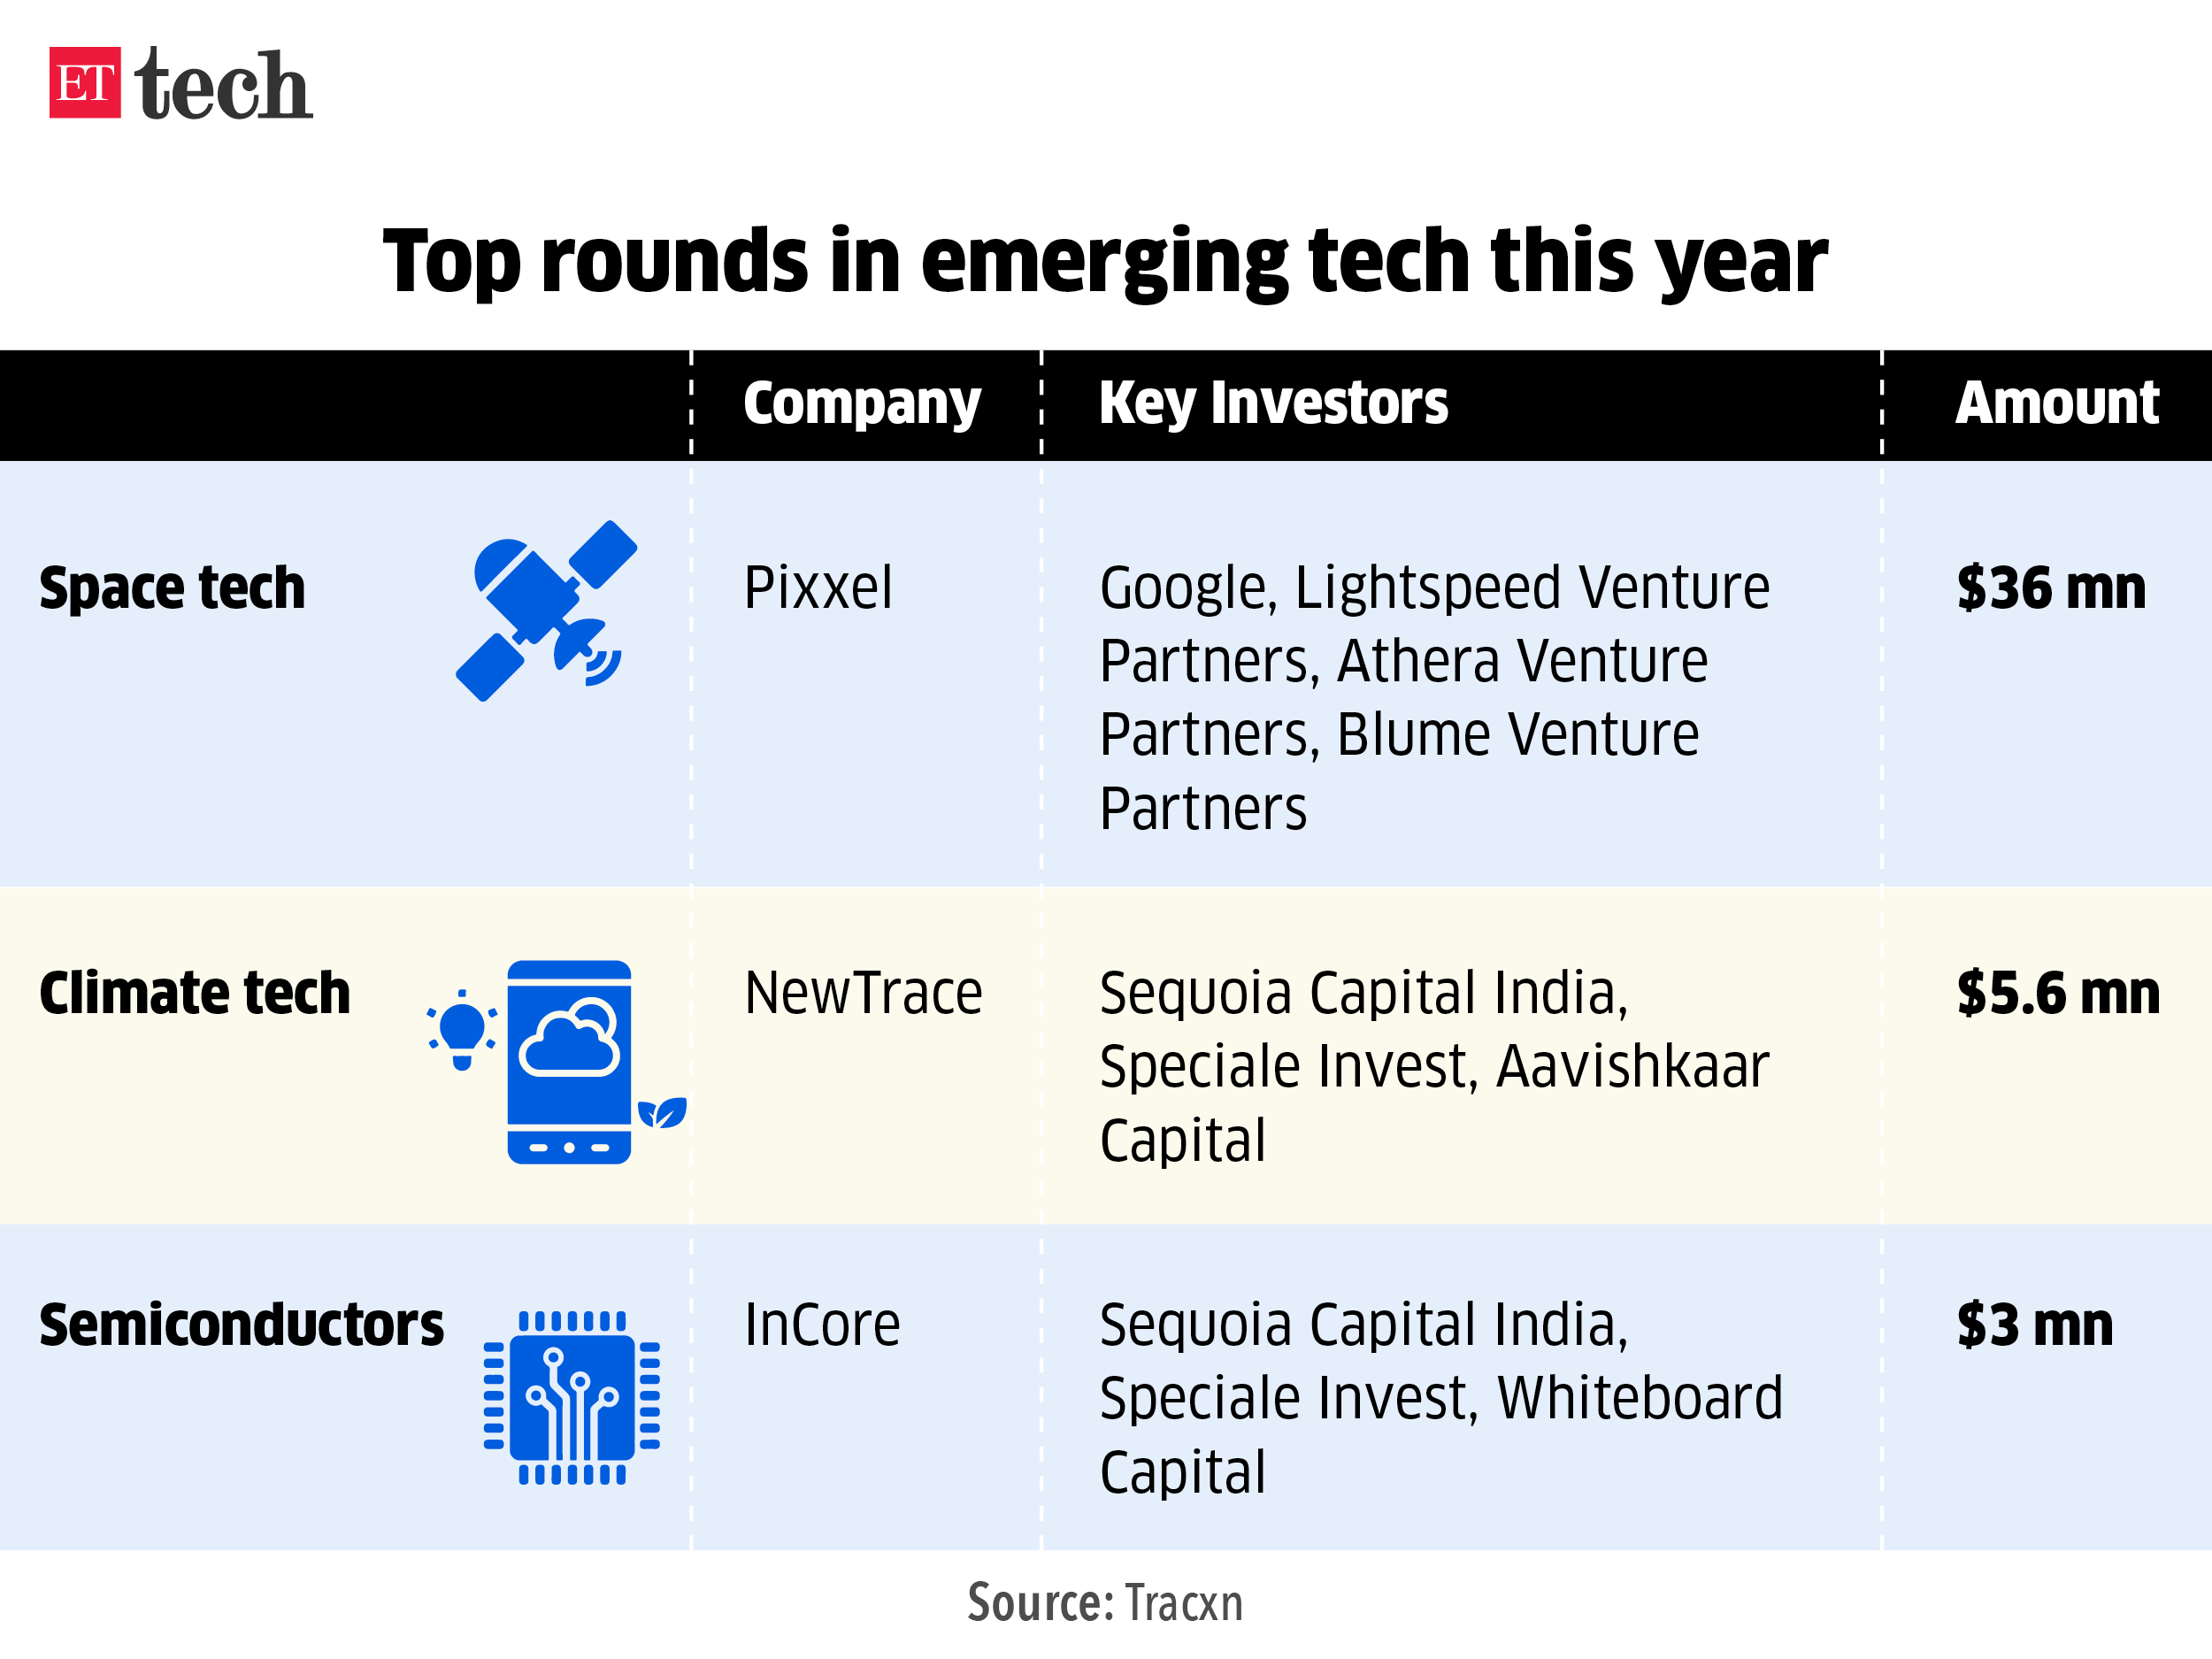 Top rounds in emerging tech this year